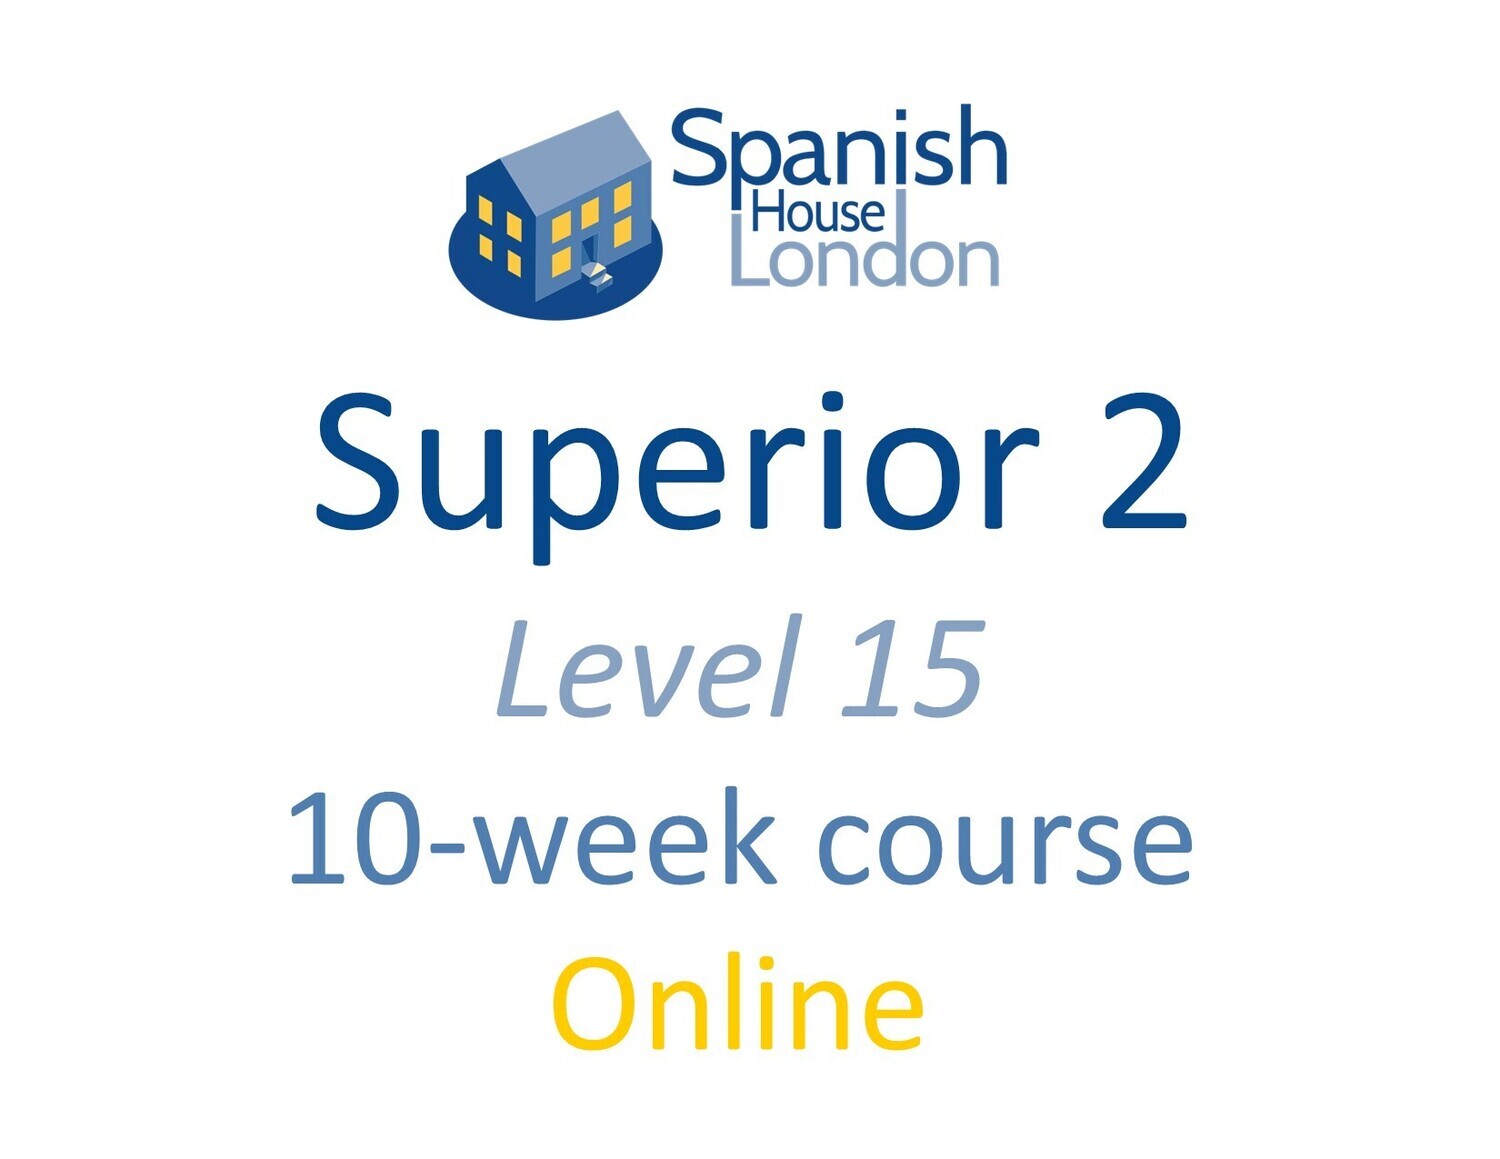 Superior 2 Course starting on 13th July at 7.30pm